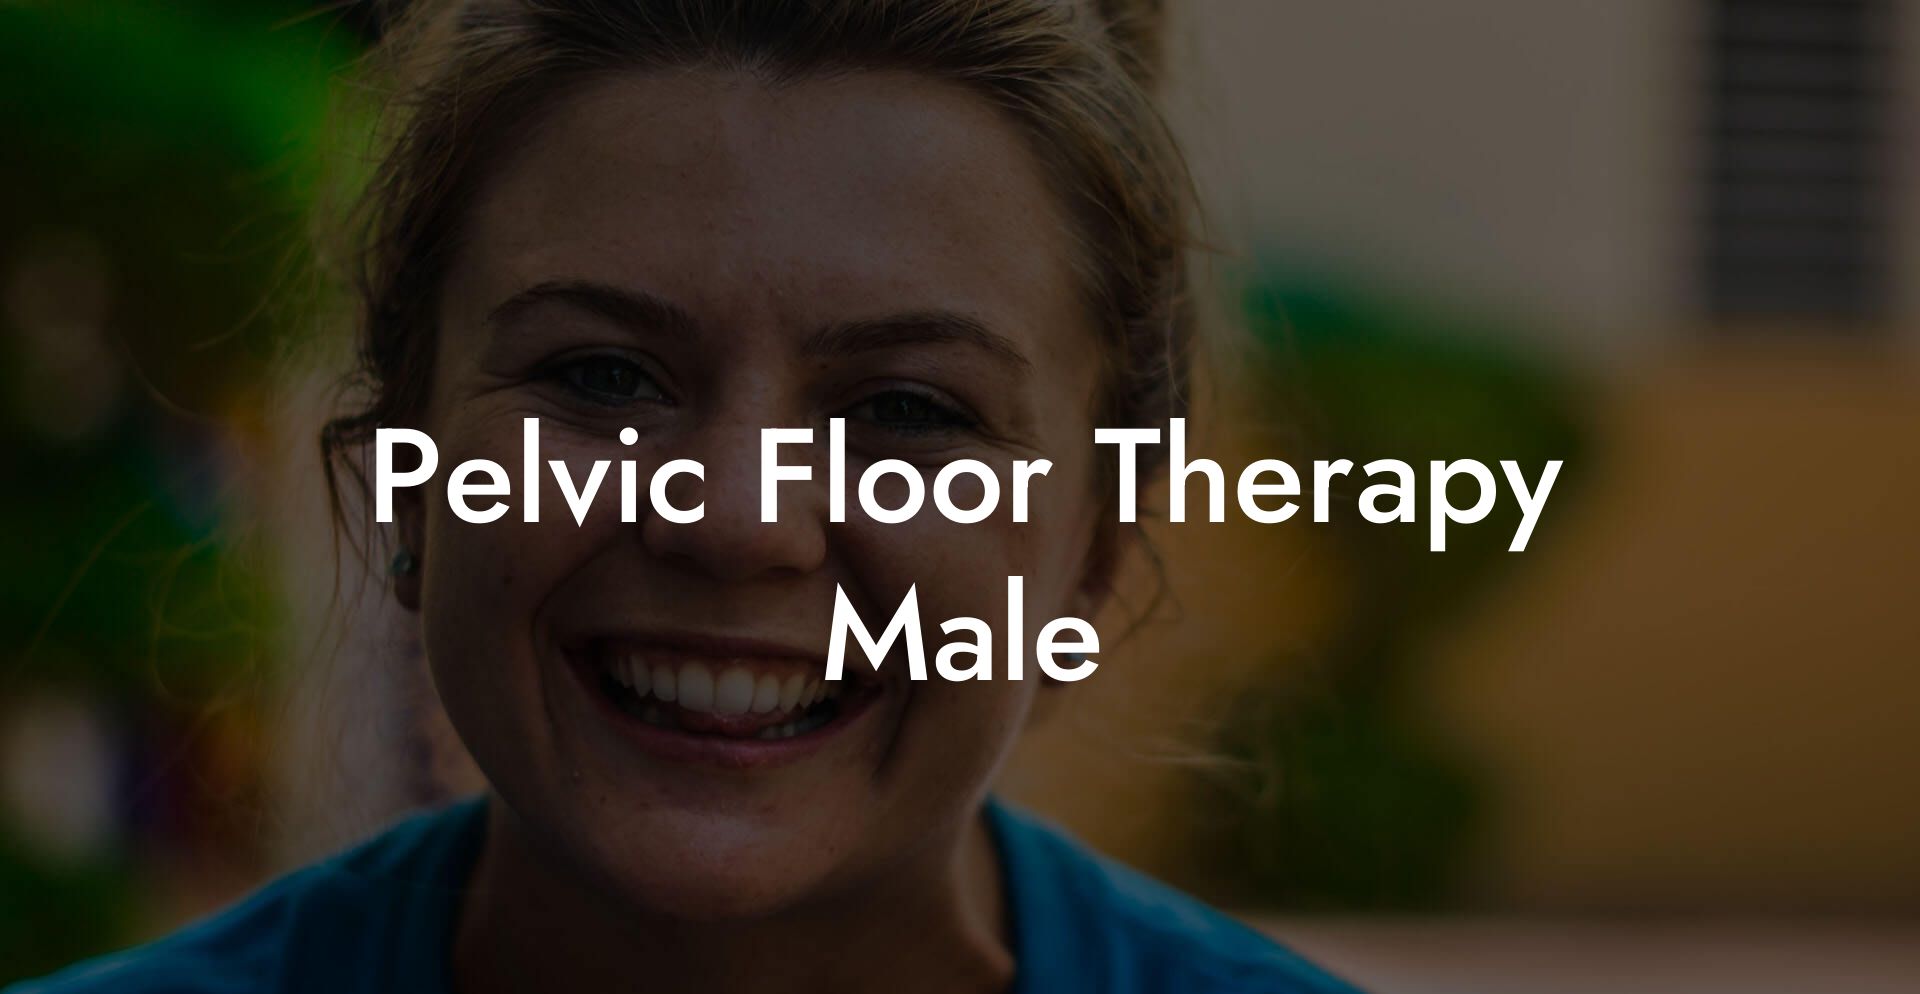 Pelvic Floor Therapy Male